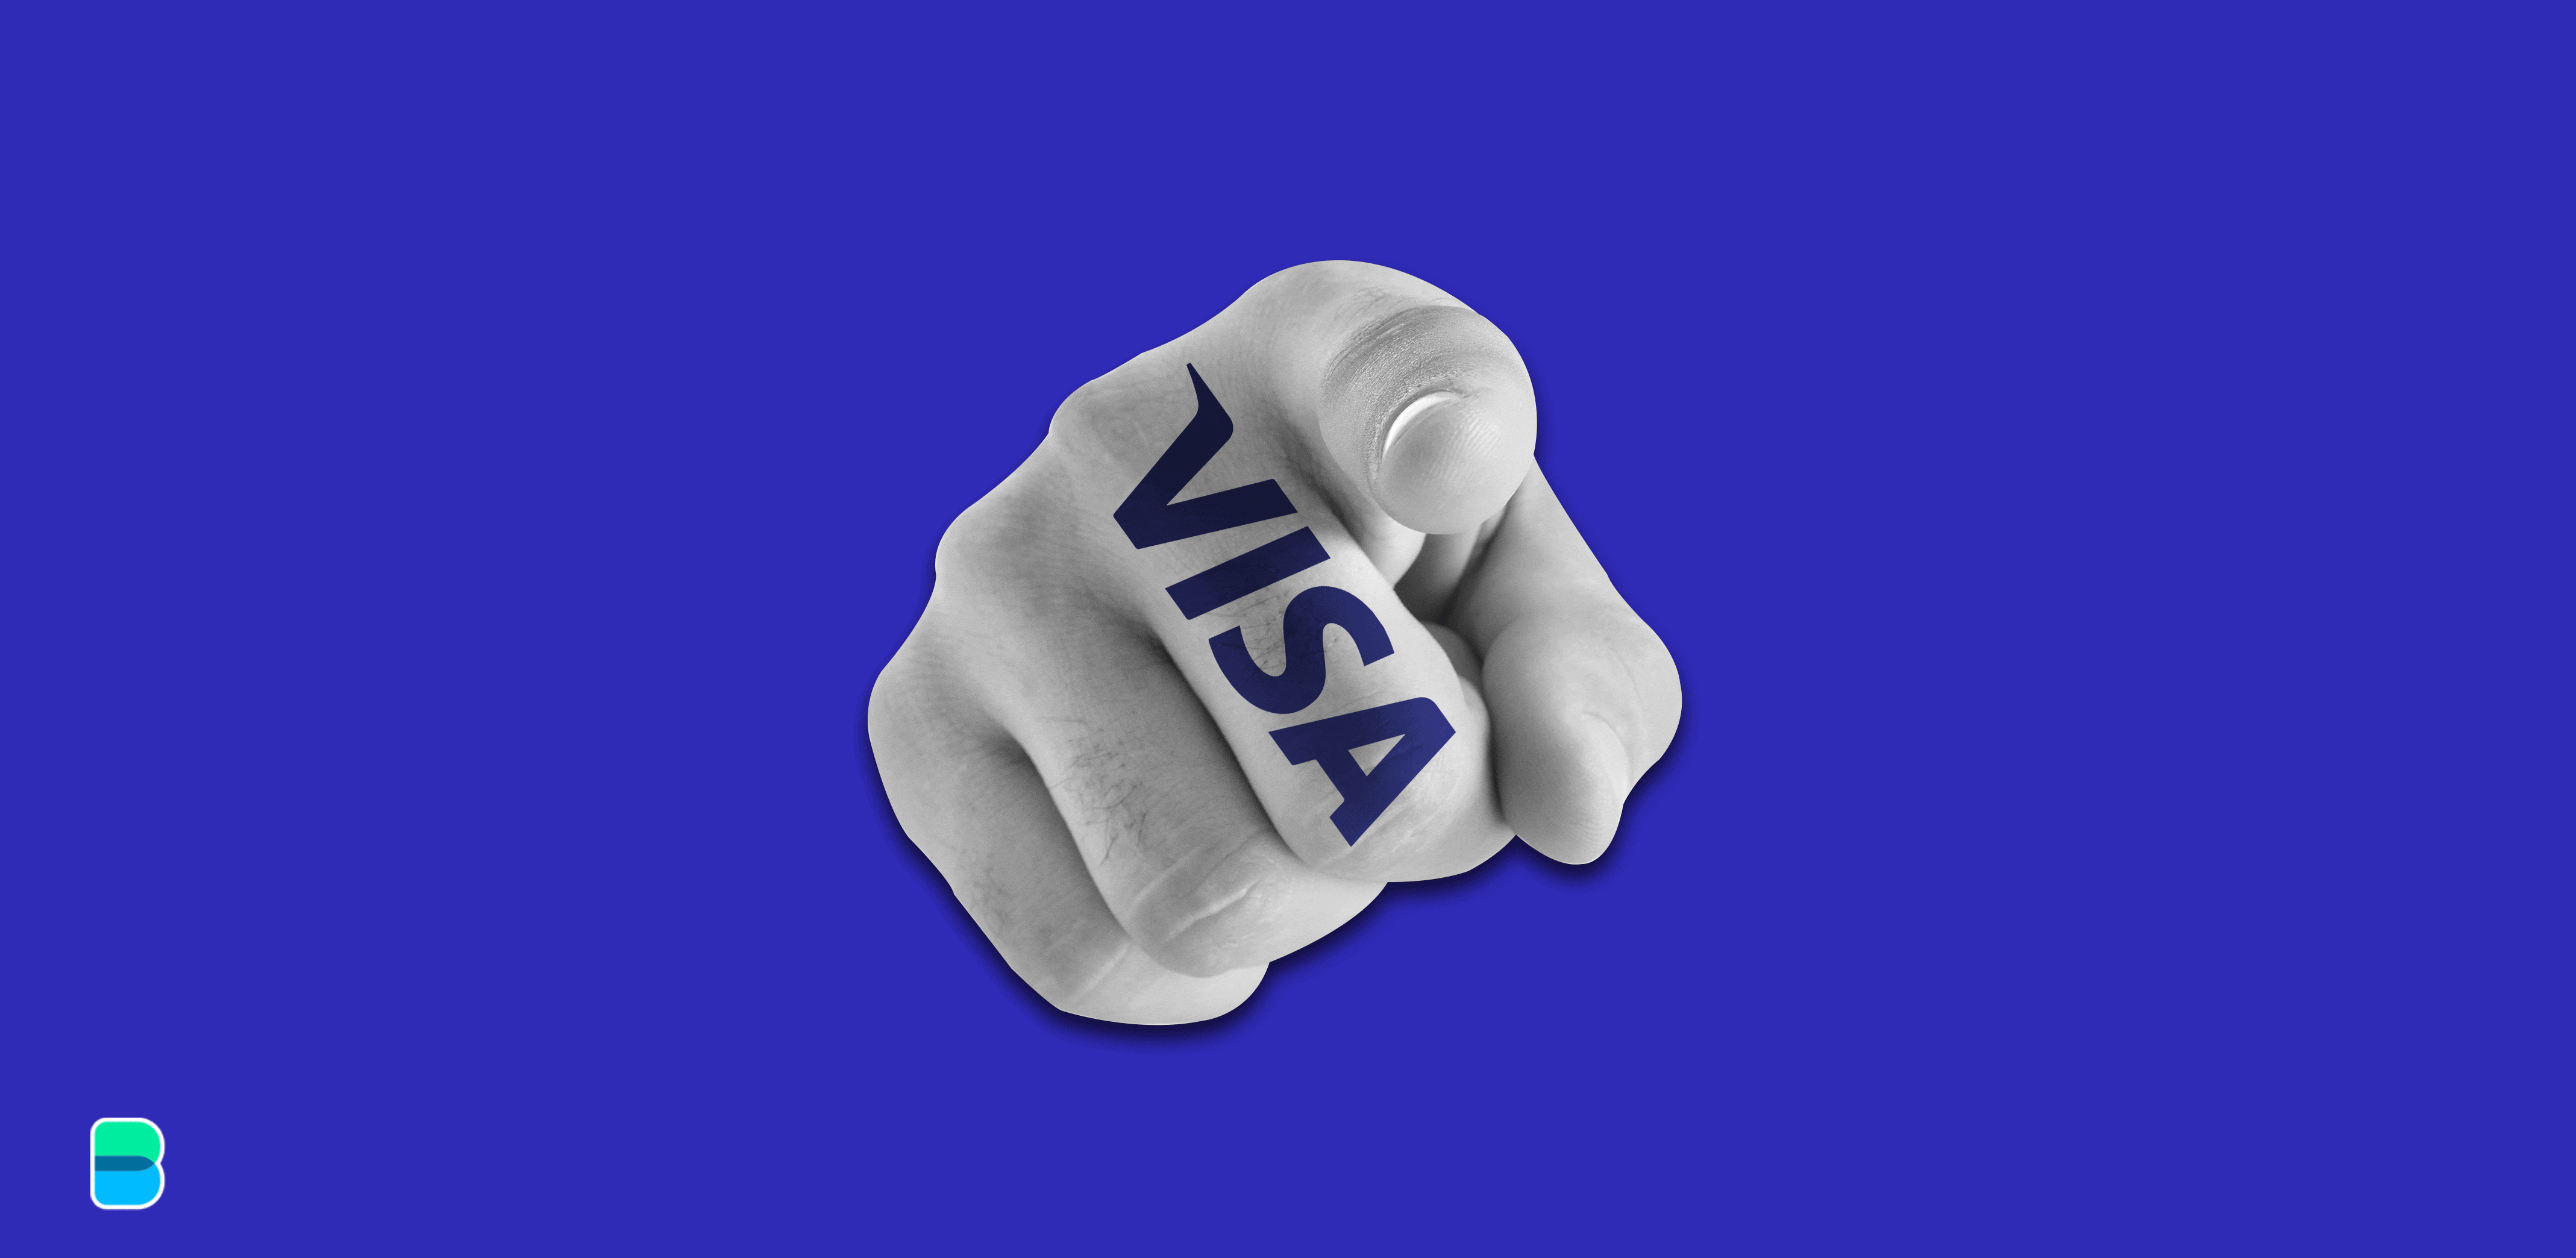 Visa wants none of privacy finger-pointing